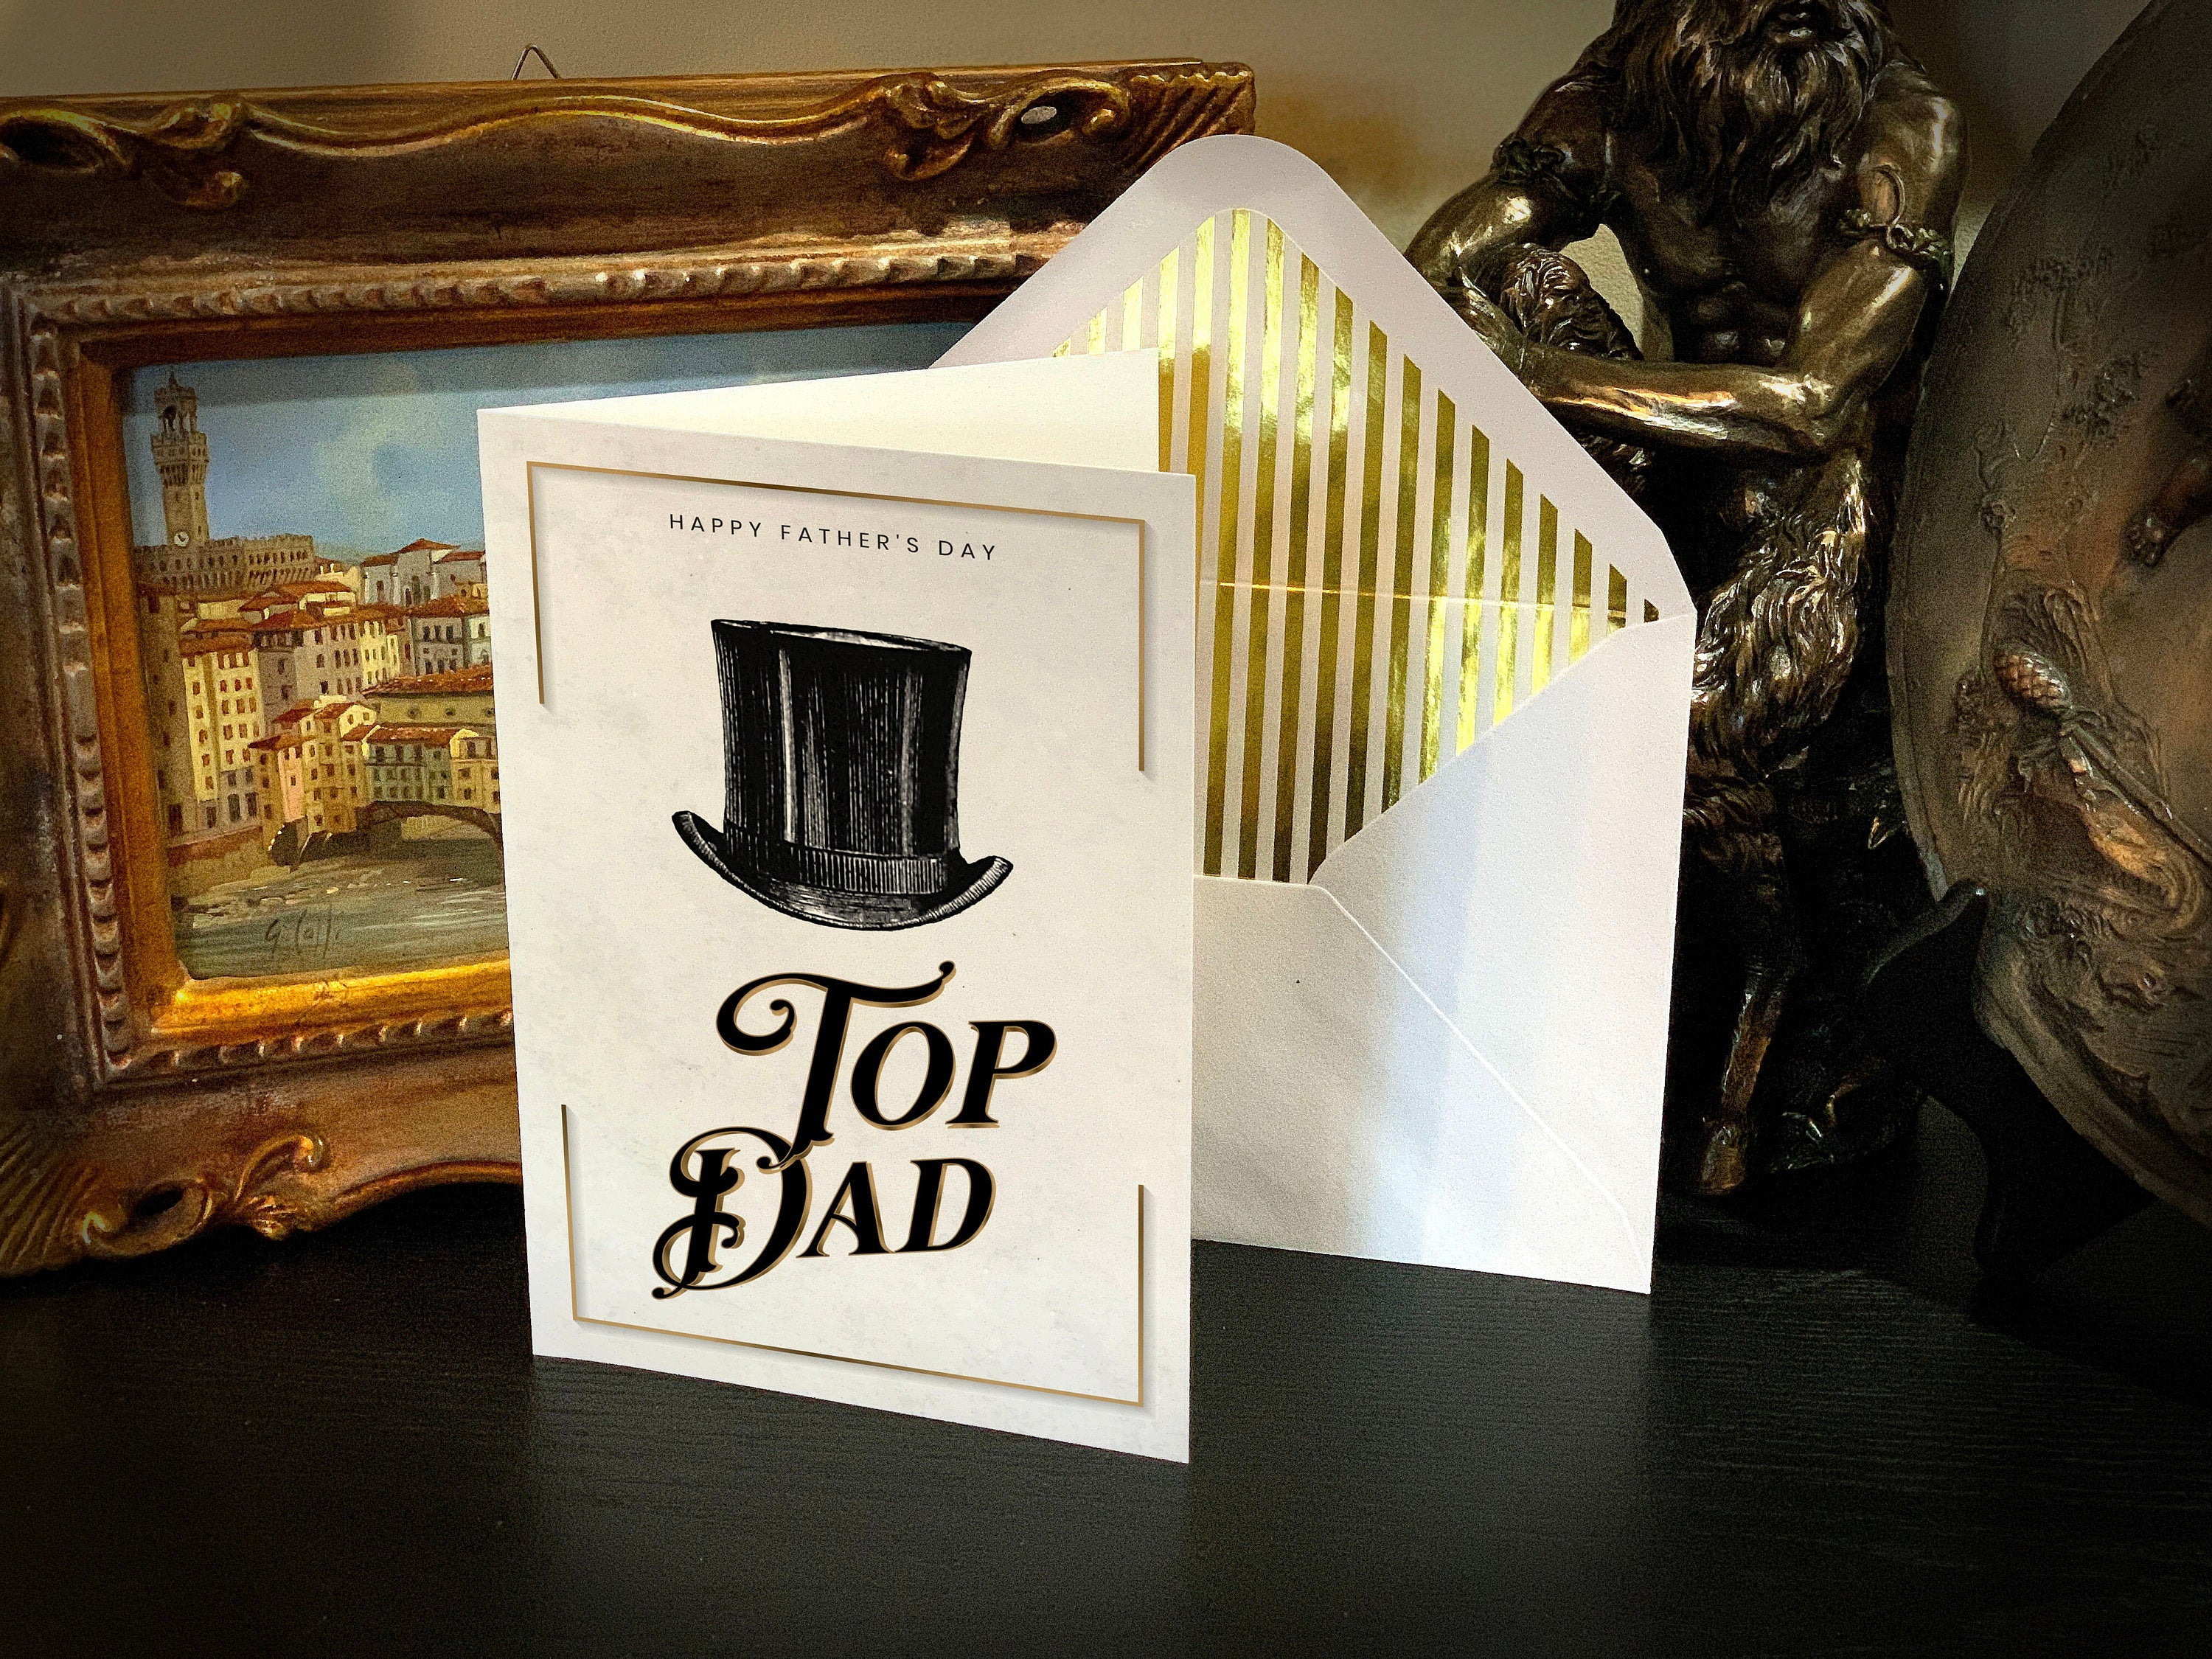 Top Dad, Father's Day Greeting Card with Elegant Striped Gold Foil Envelope, 1 Card/Envelope